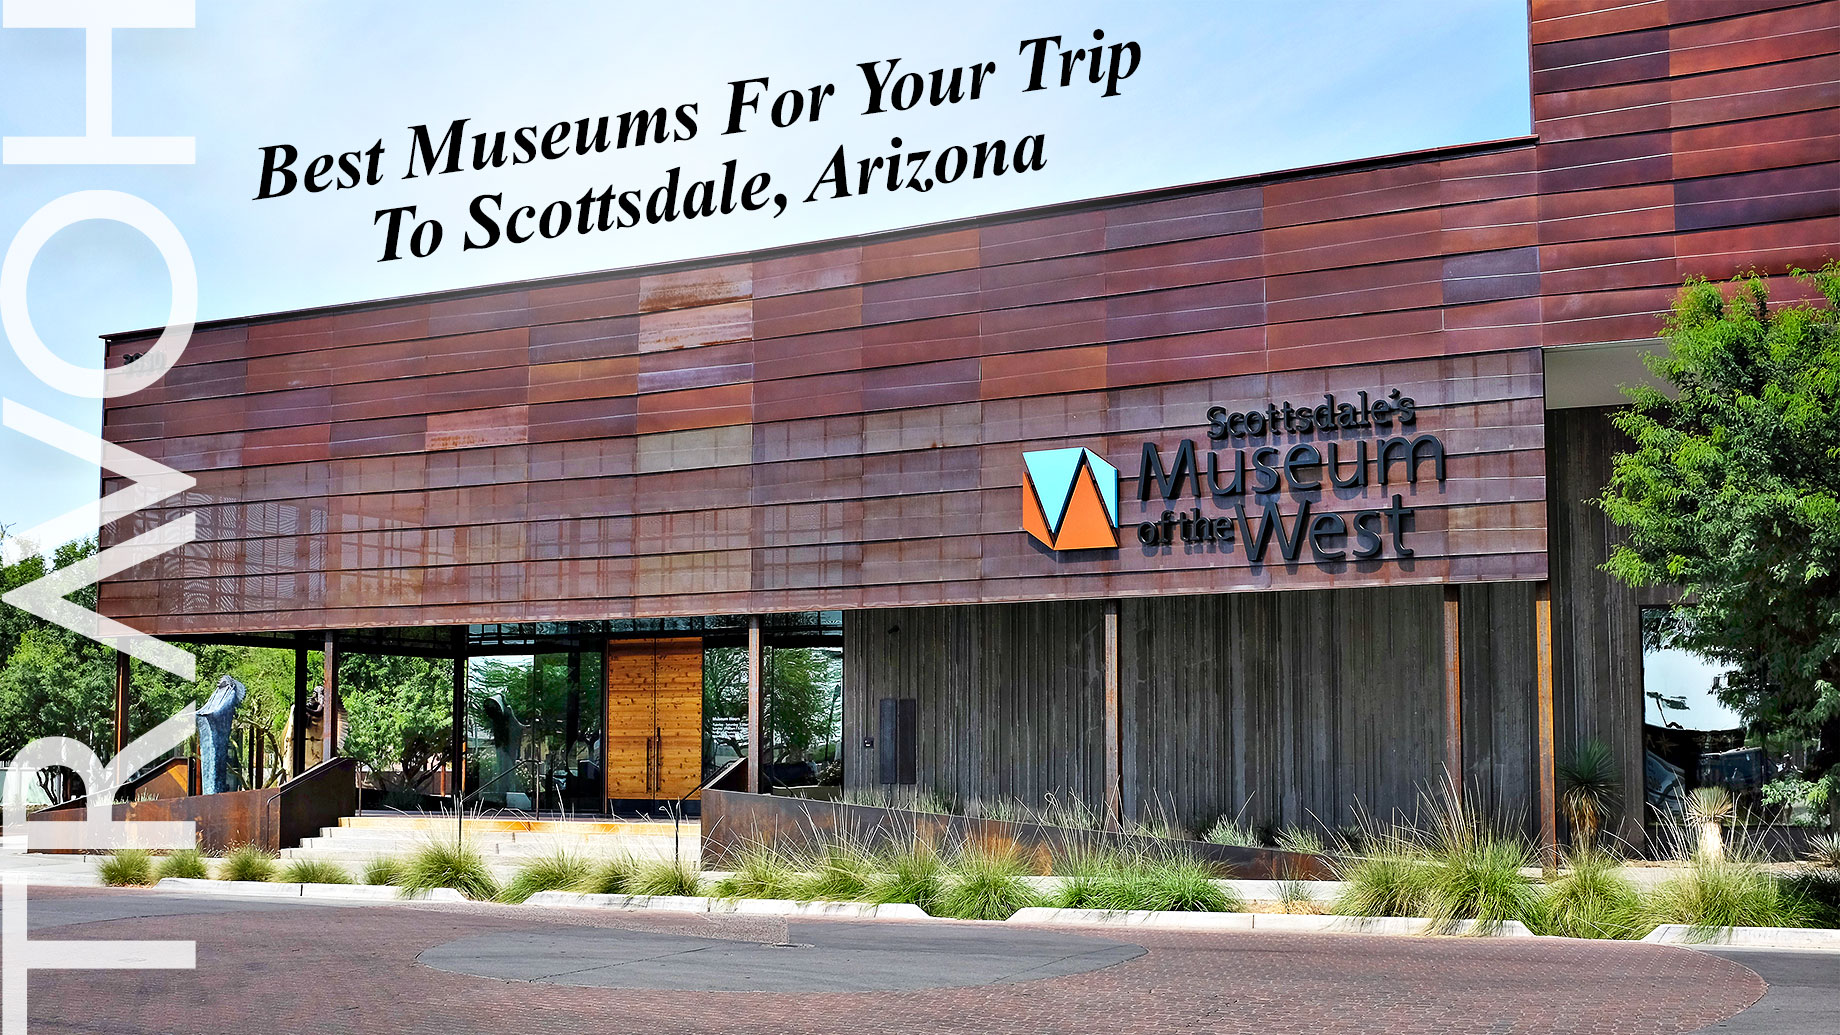 Best Museums For Your Trip To Scottsdale, Arizona